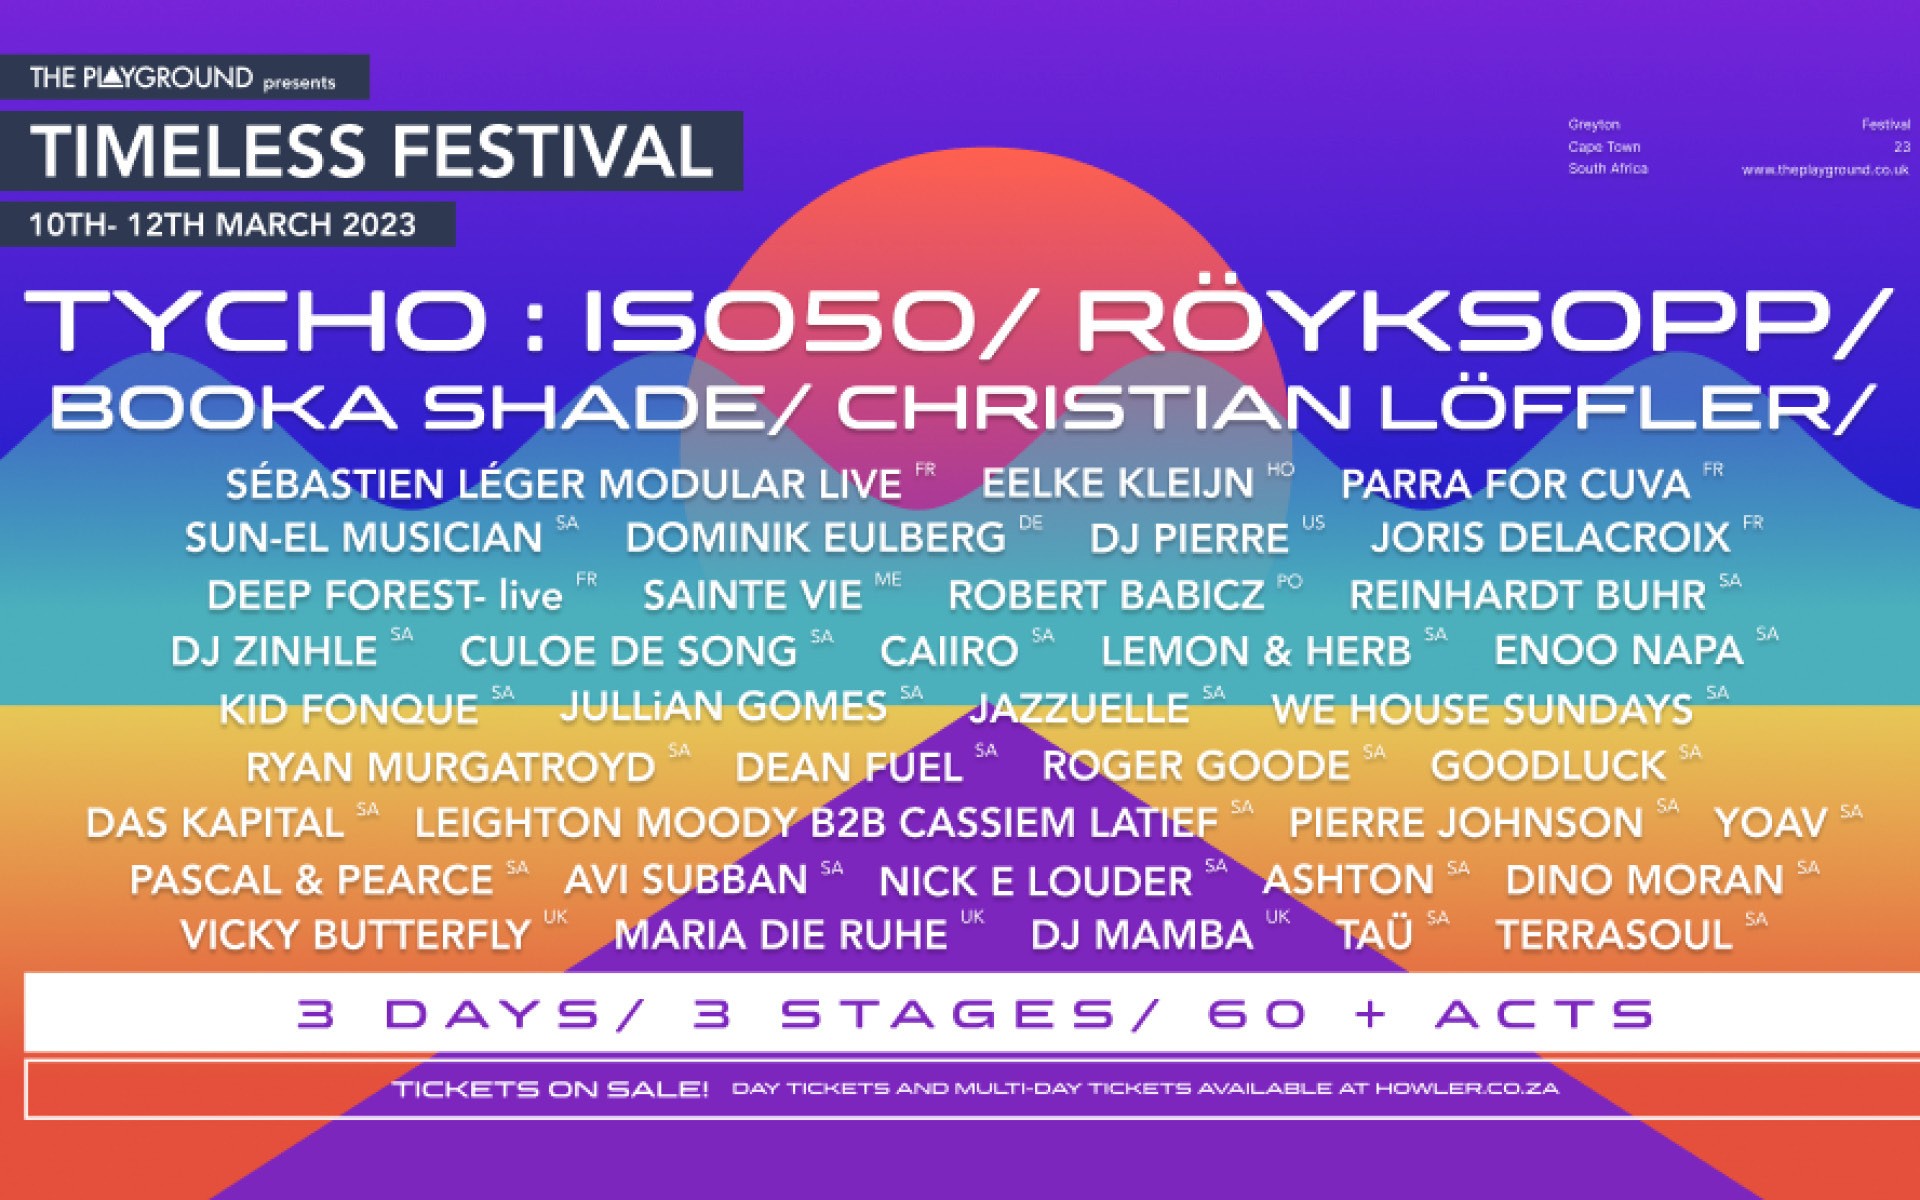 THE PLAYGROUND presents TIMELESS FESTIVAL 2023